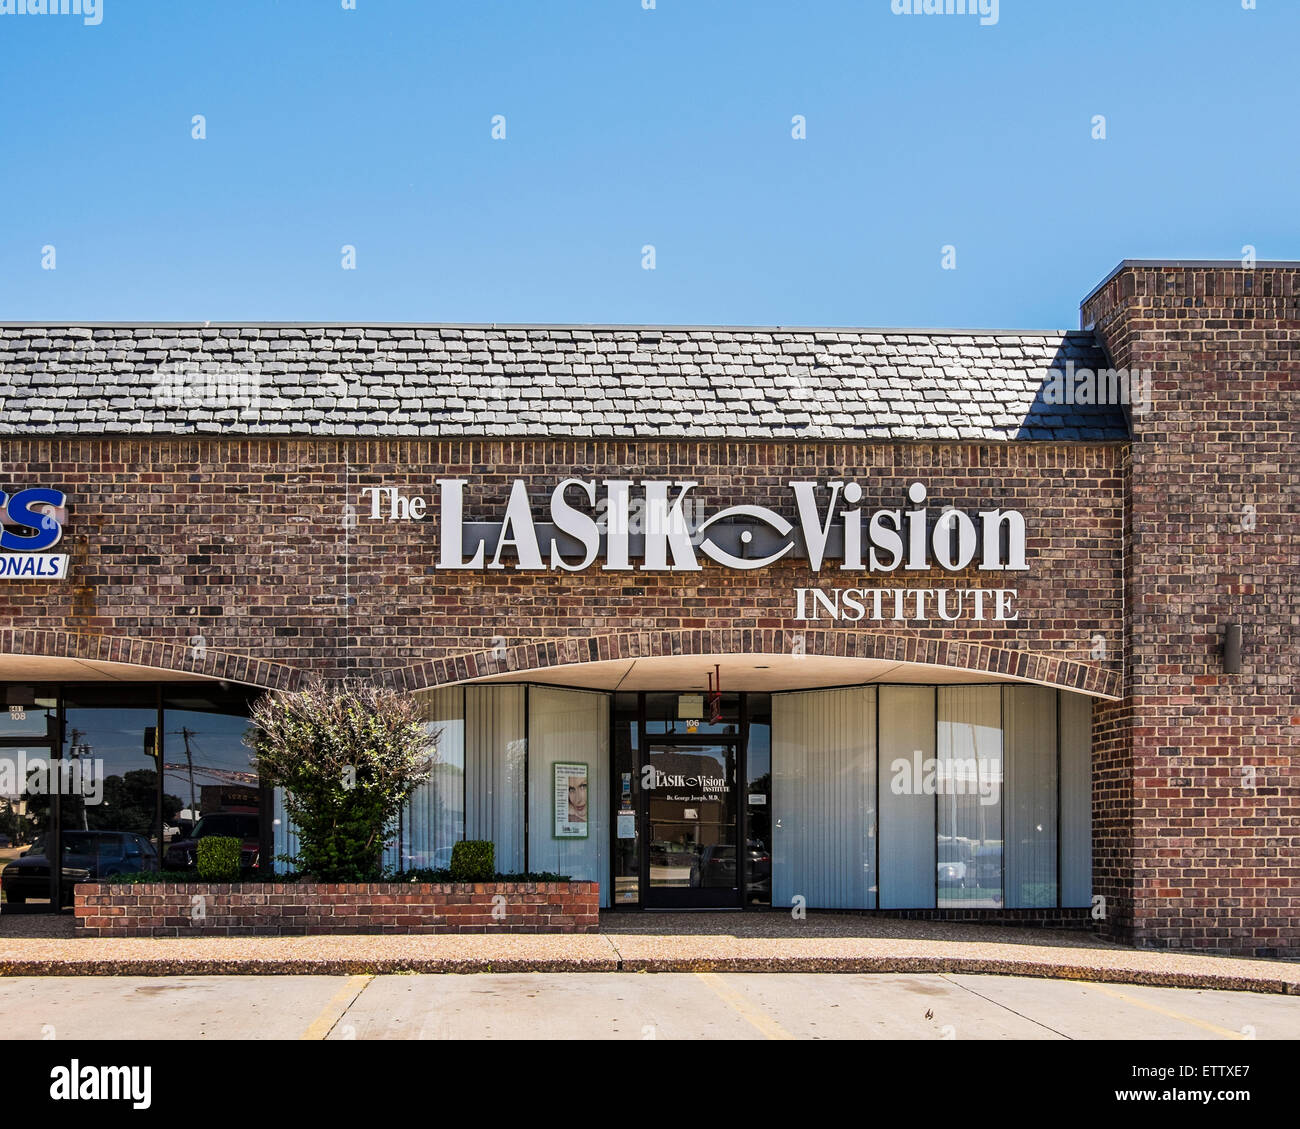 The exterior store front of The Lasik Vision Institute in Oklahoma City, Oklahoma, USA. Stock Photo